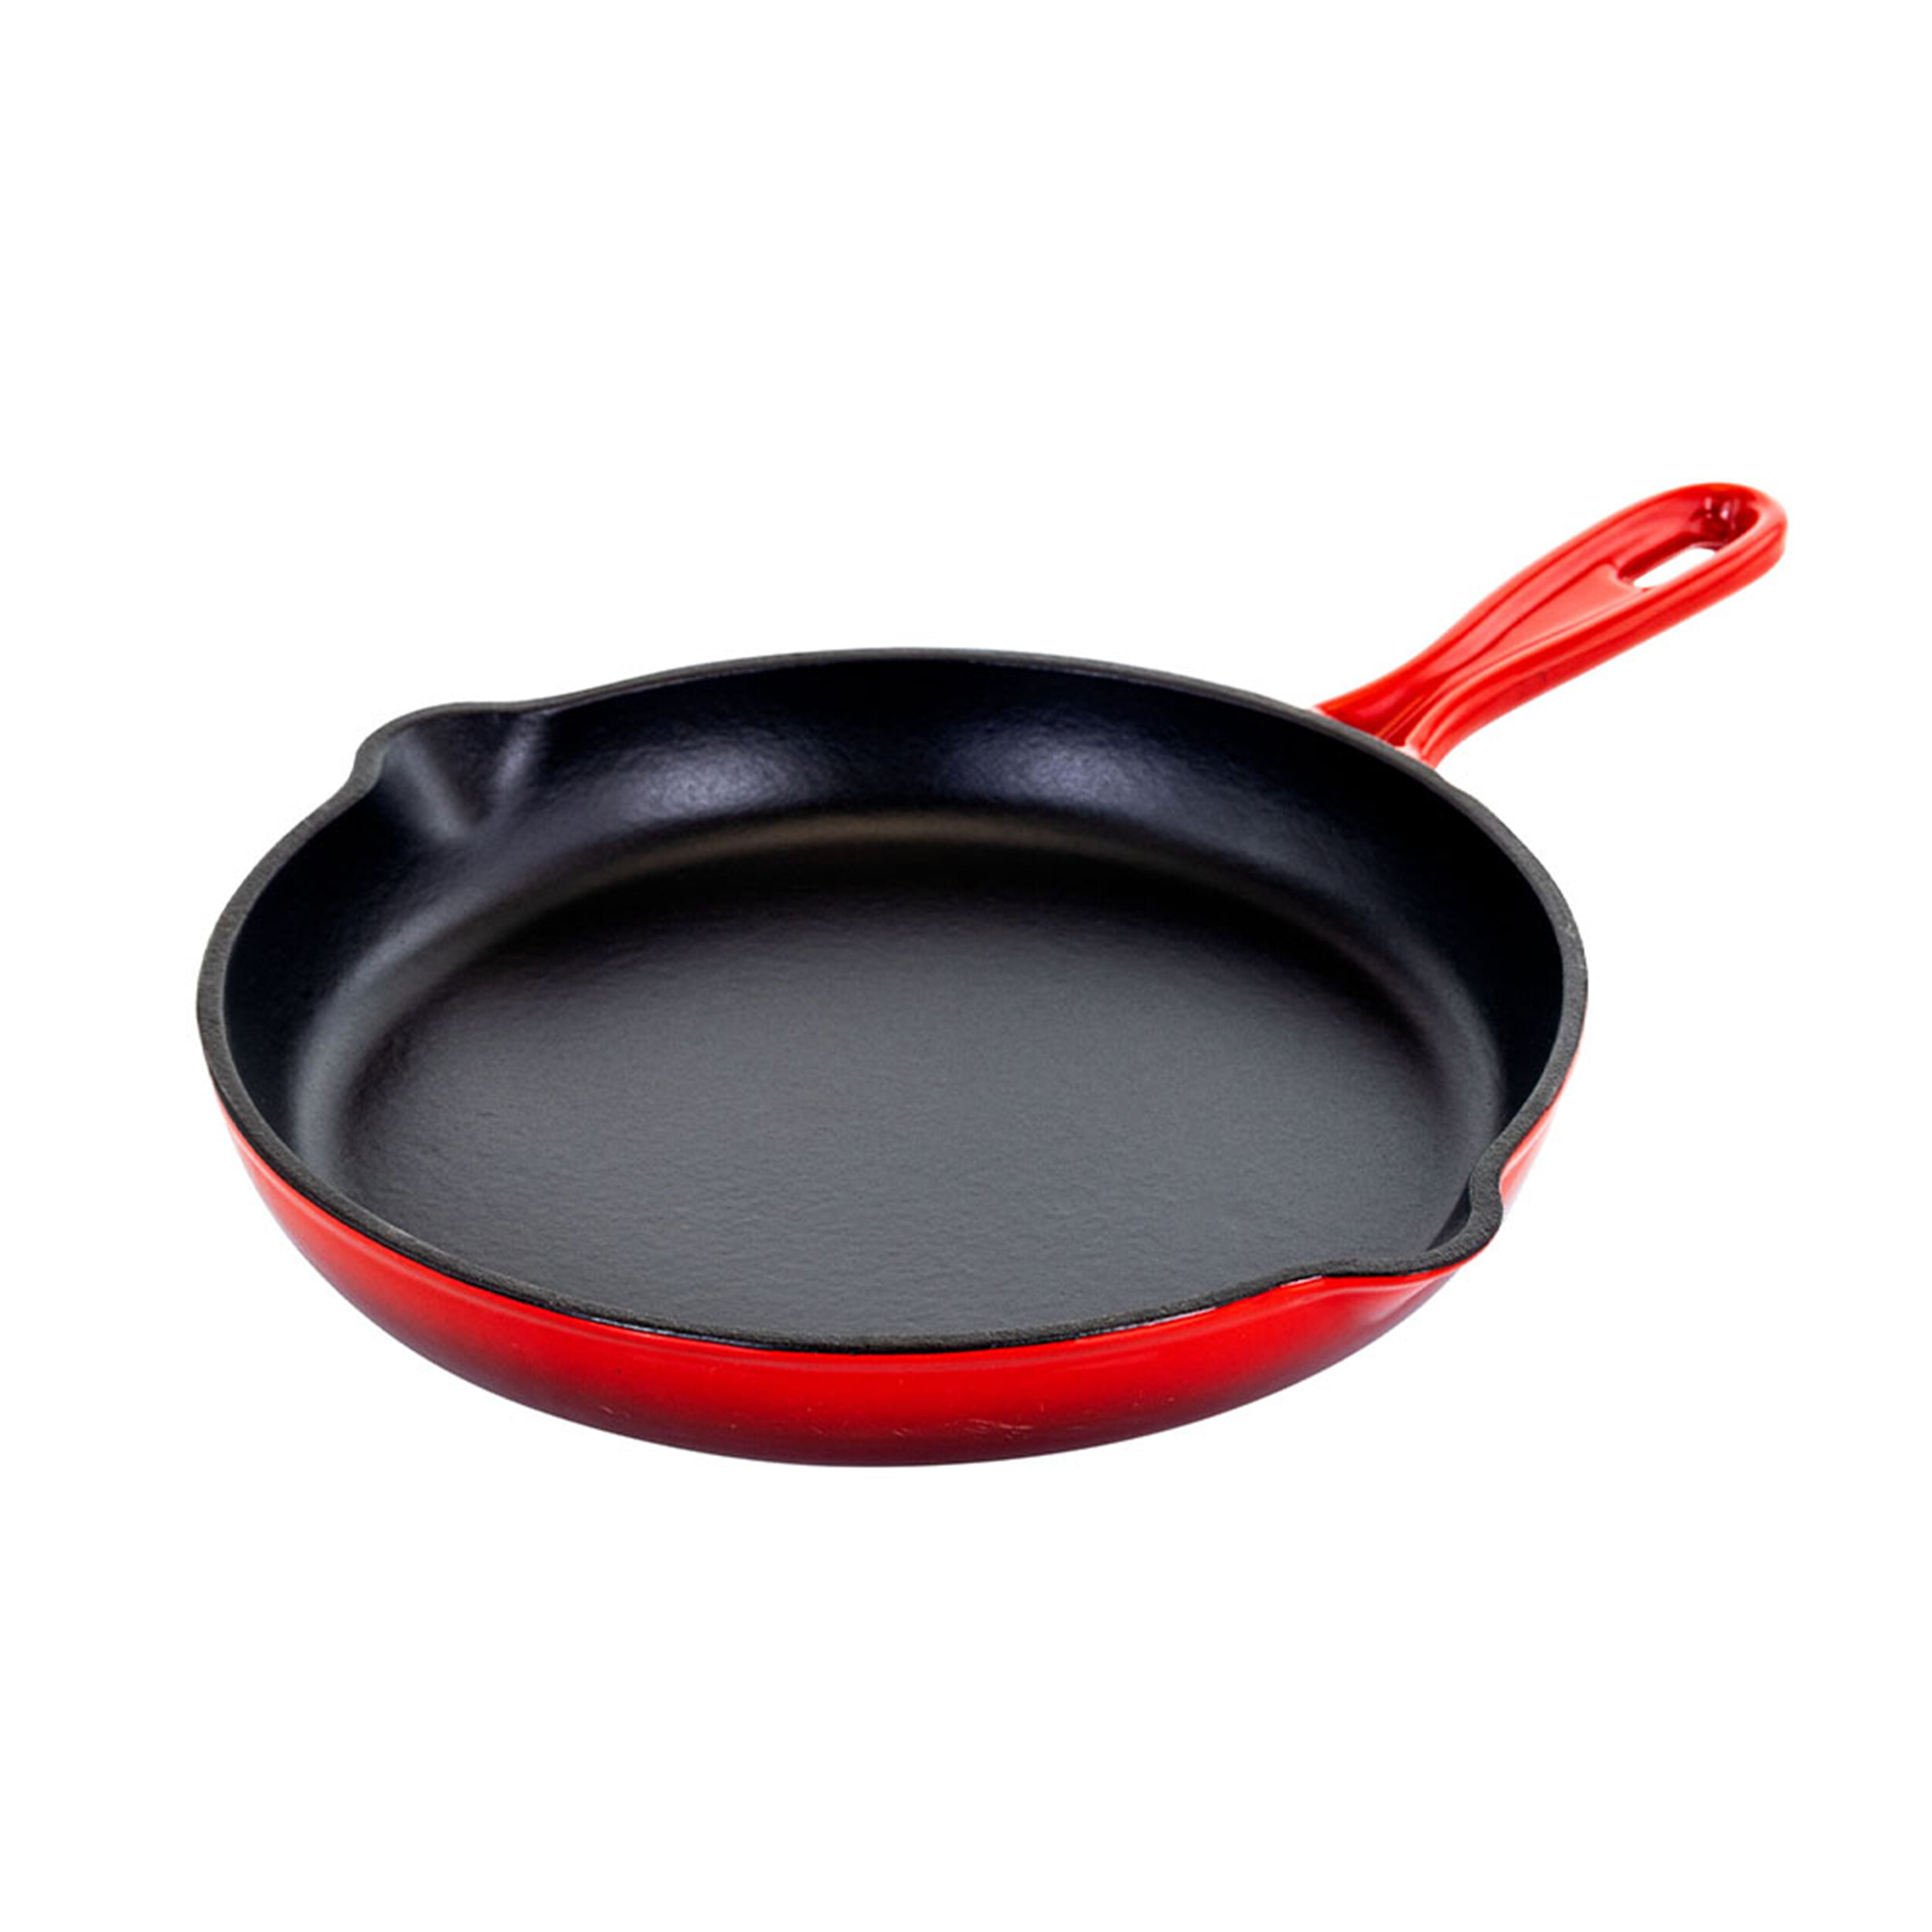 Better Chef 12 in Silver Metallic Non Stick Gourmet Fry Pan in Red